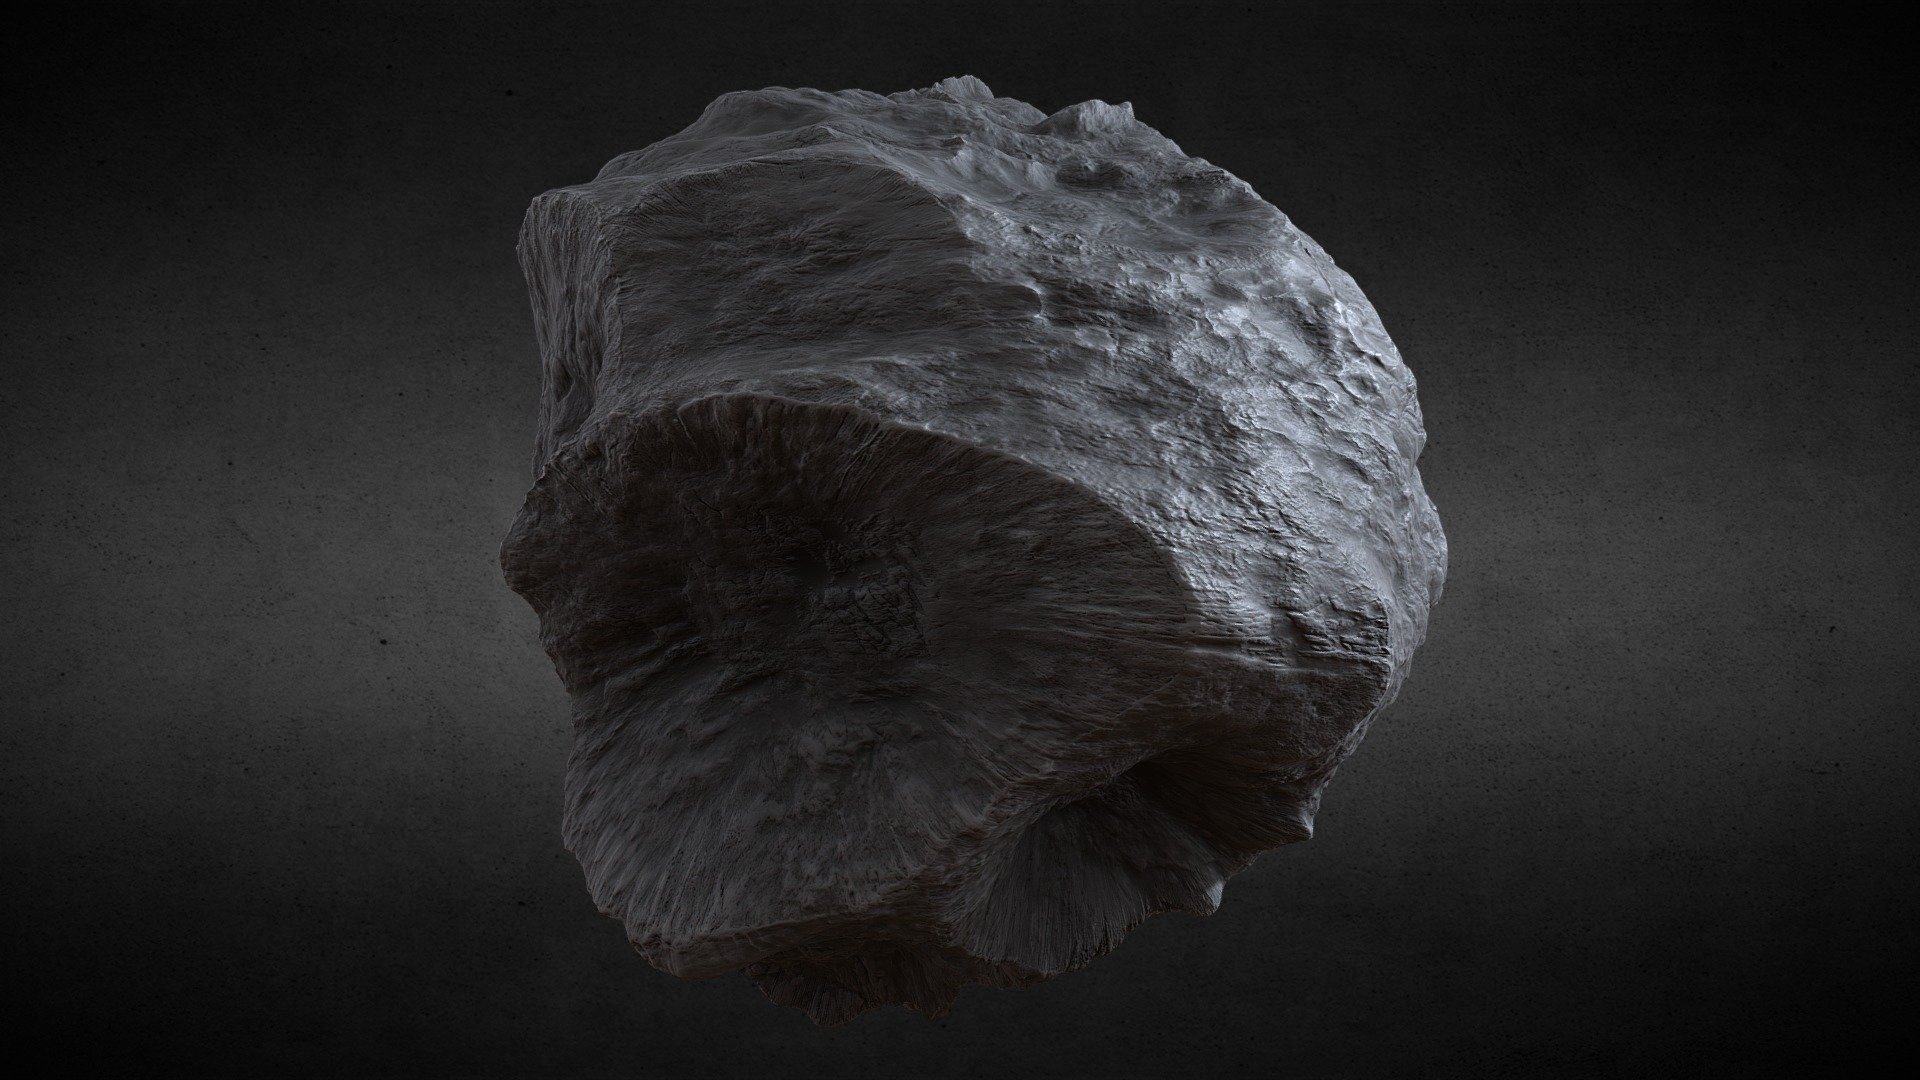 Generic moon-themed asteroid, pockmarked with craters, crevices and gritty roughness.
Displacement turned out fine, but I expected a better result&hellip; lots of room for improvement (on my end, not Sketchfab's)!
Still, a great overall spacerock that definitely provides the right vibes for a sci-fi themed game or a good 3D render for a poster!

Showcase Mesh: MatSphere v1p4x (My custom &ldquo;Low-pinch